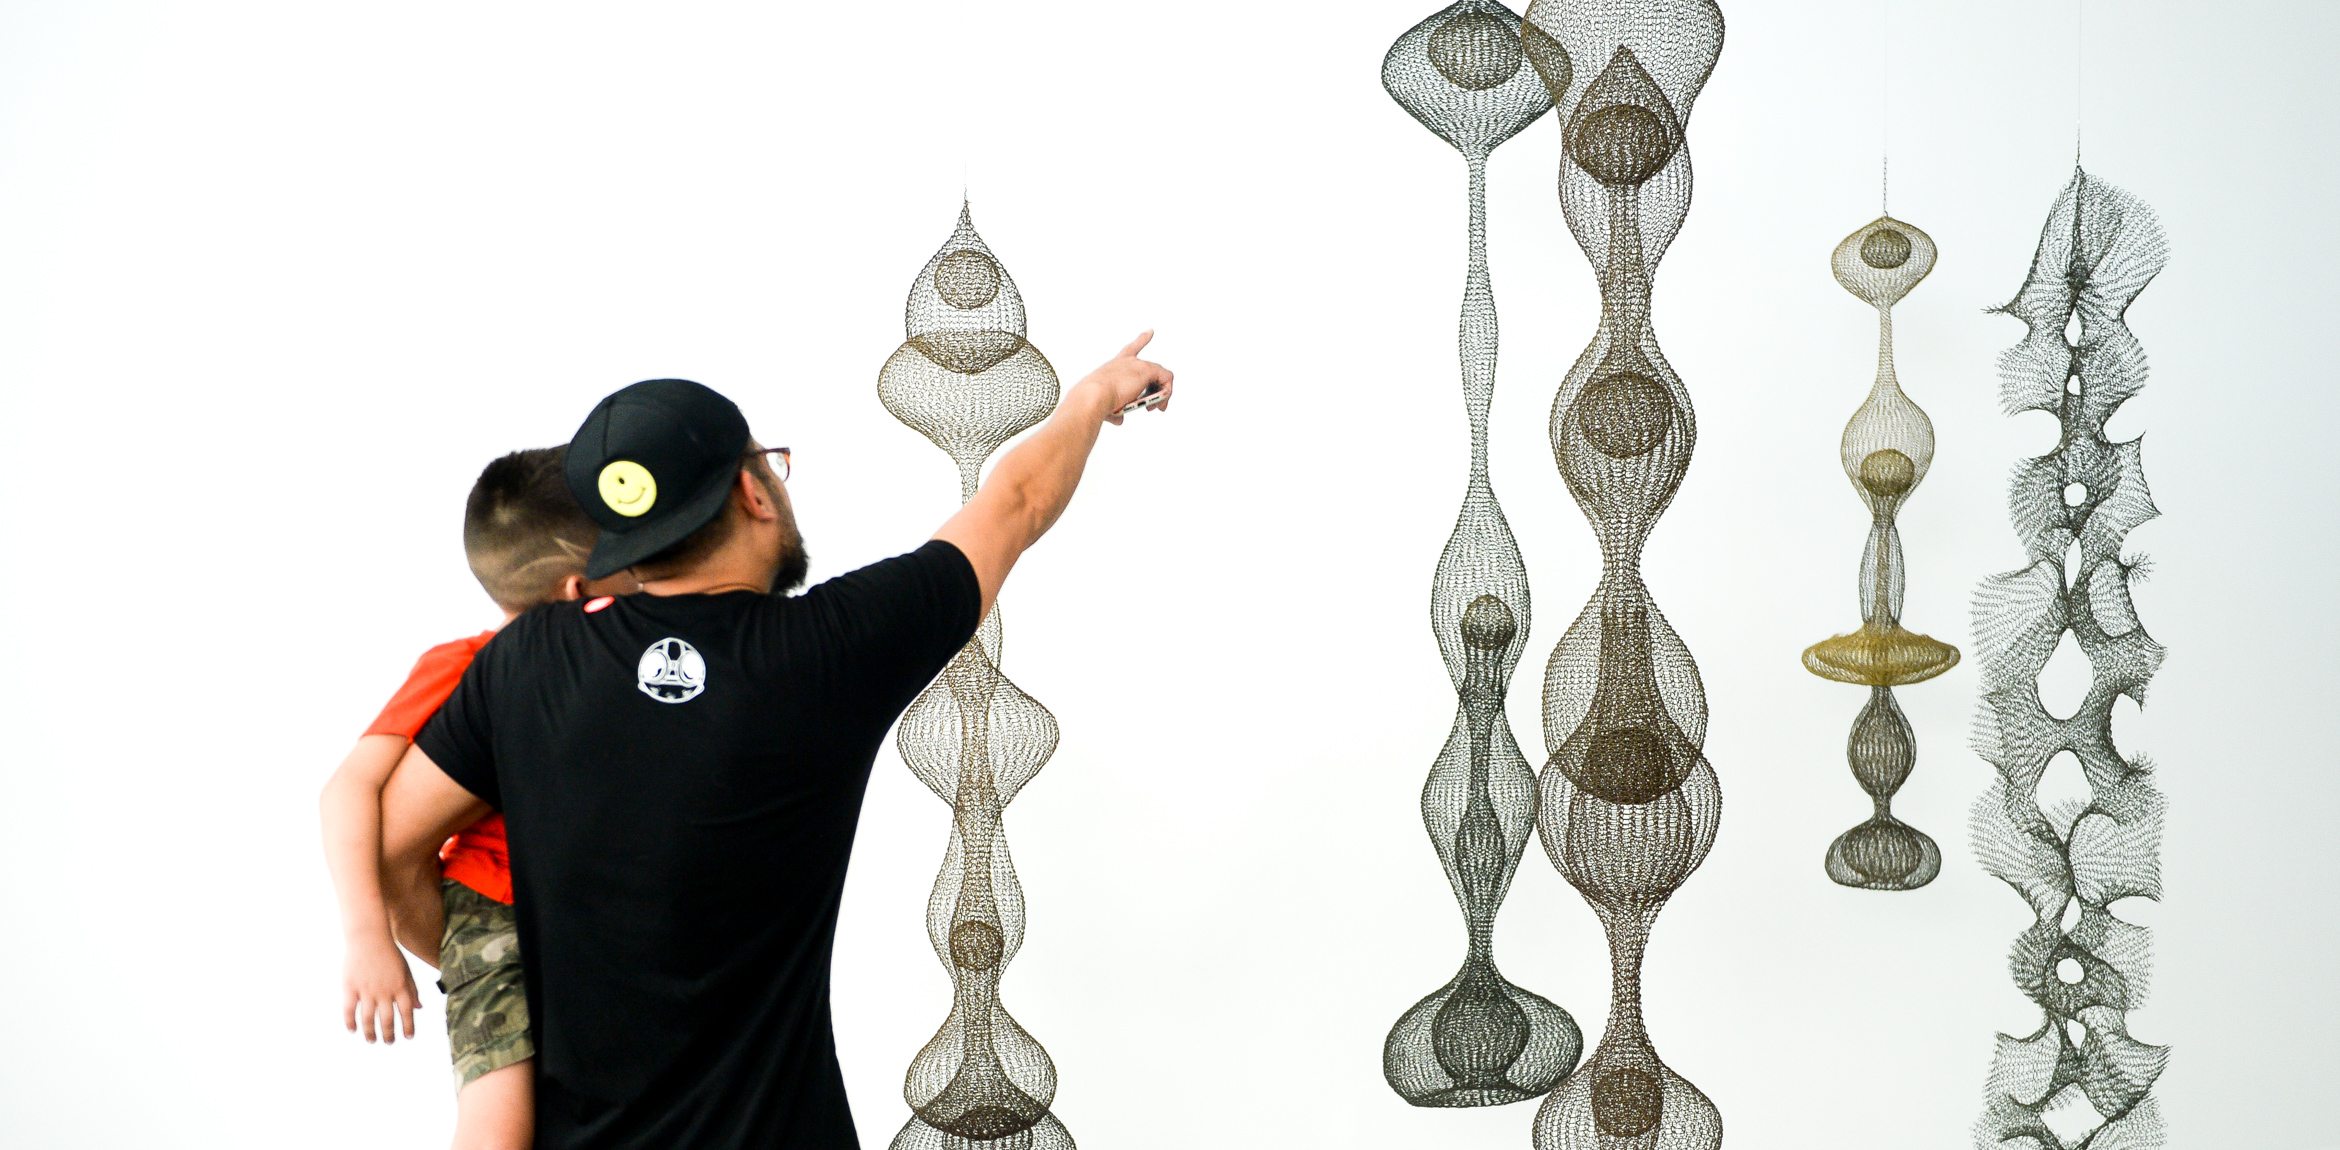 A visitor carrying a child points at a Ruth Asawa's hanging wire sculptures.